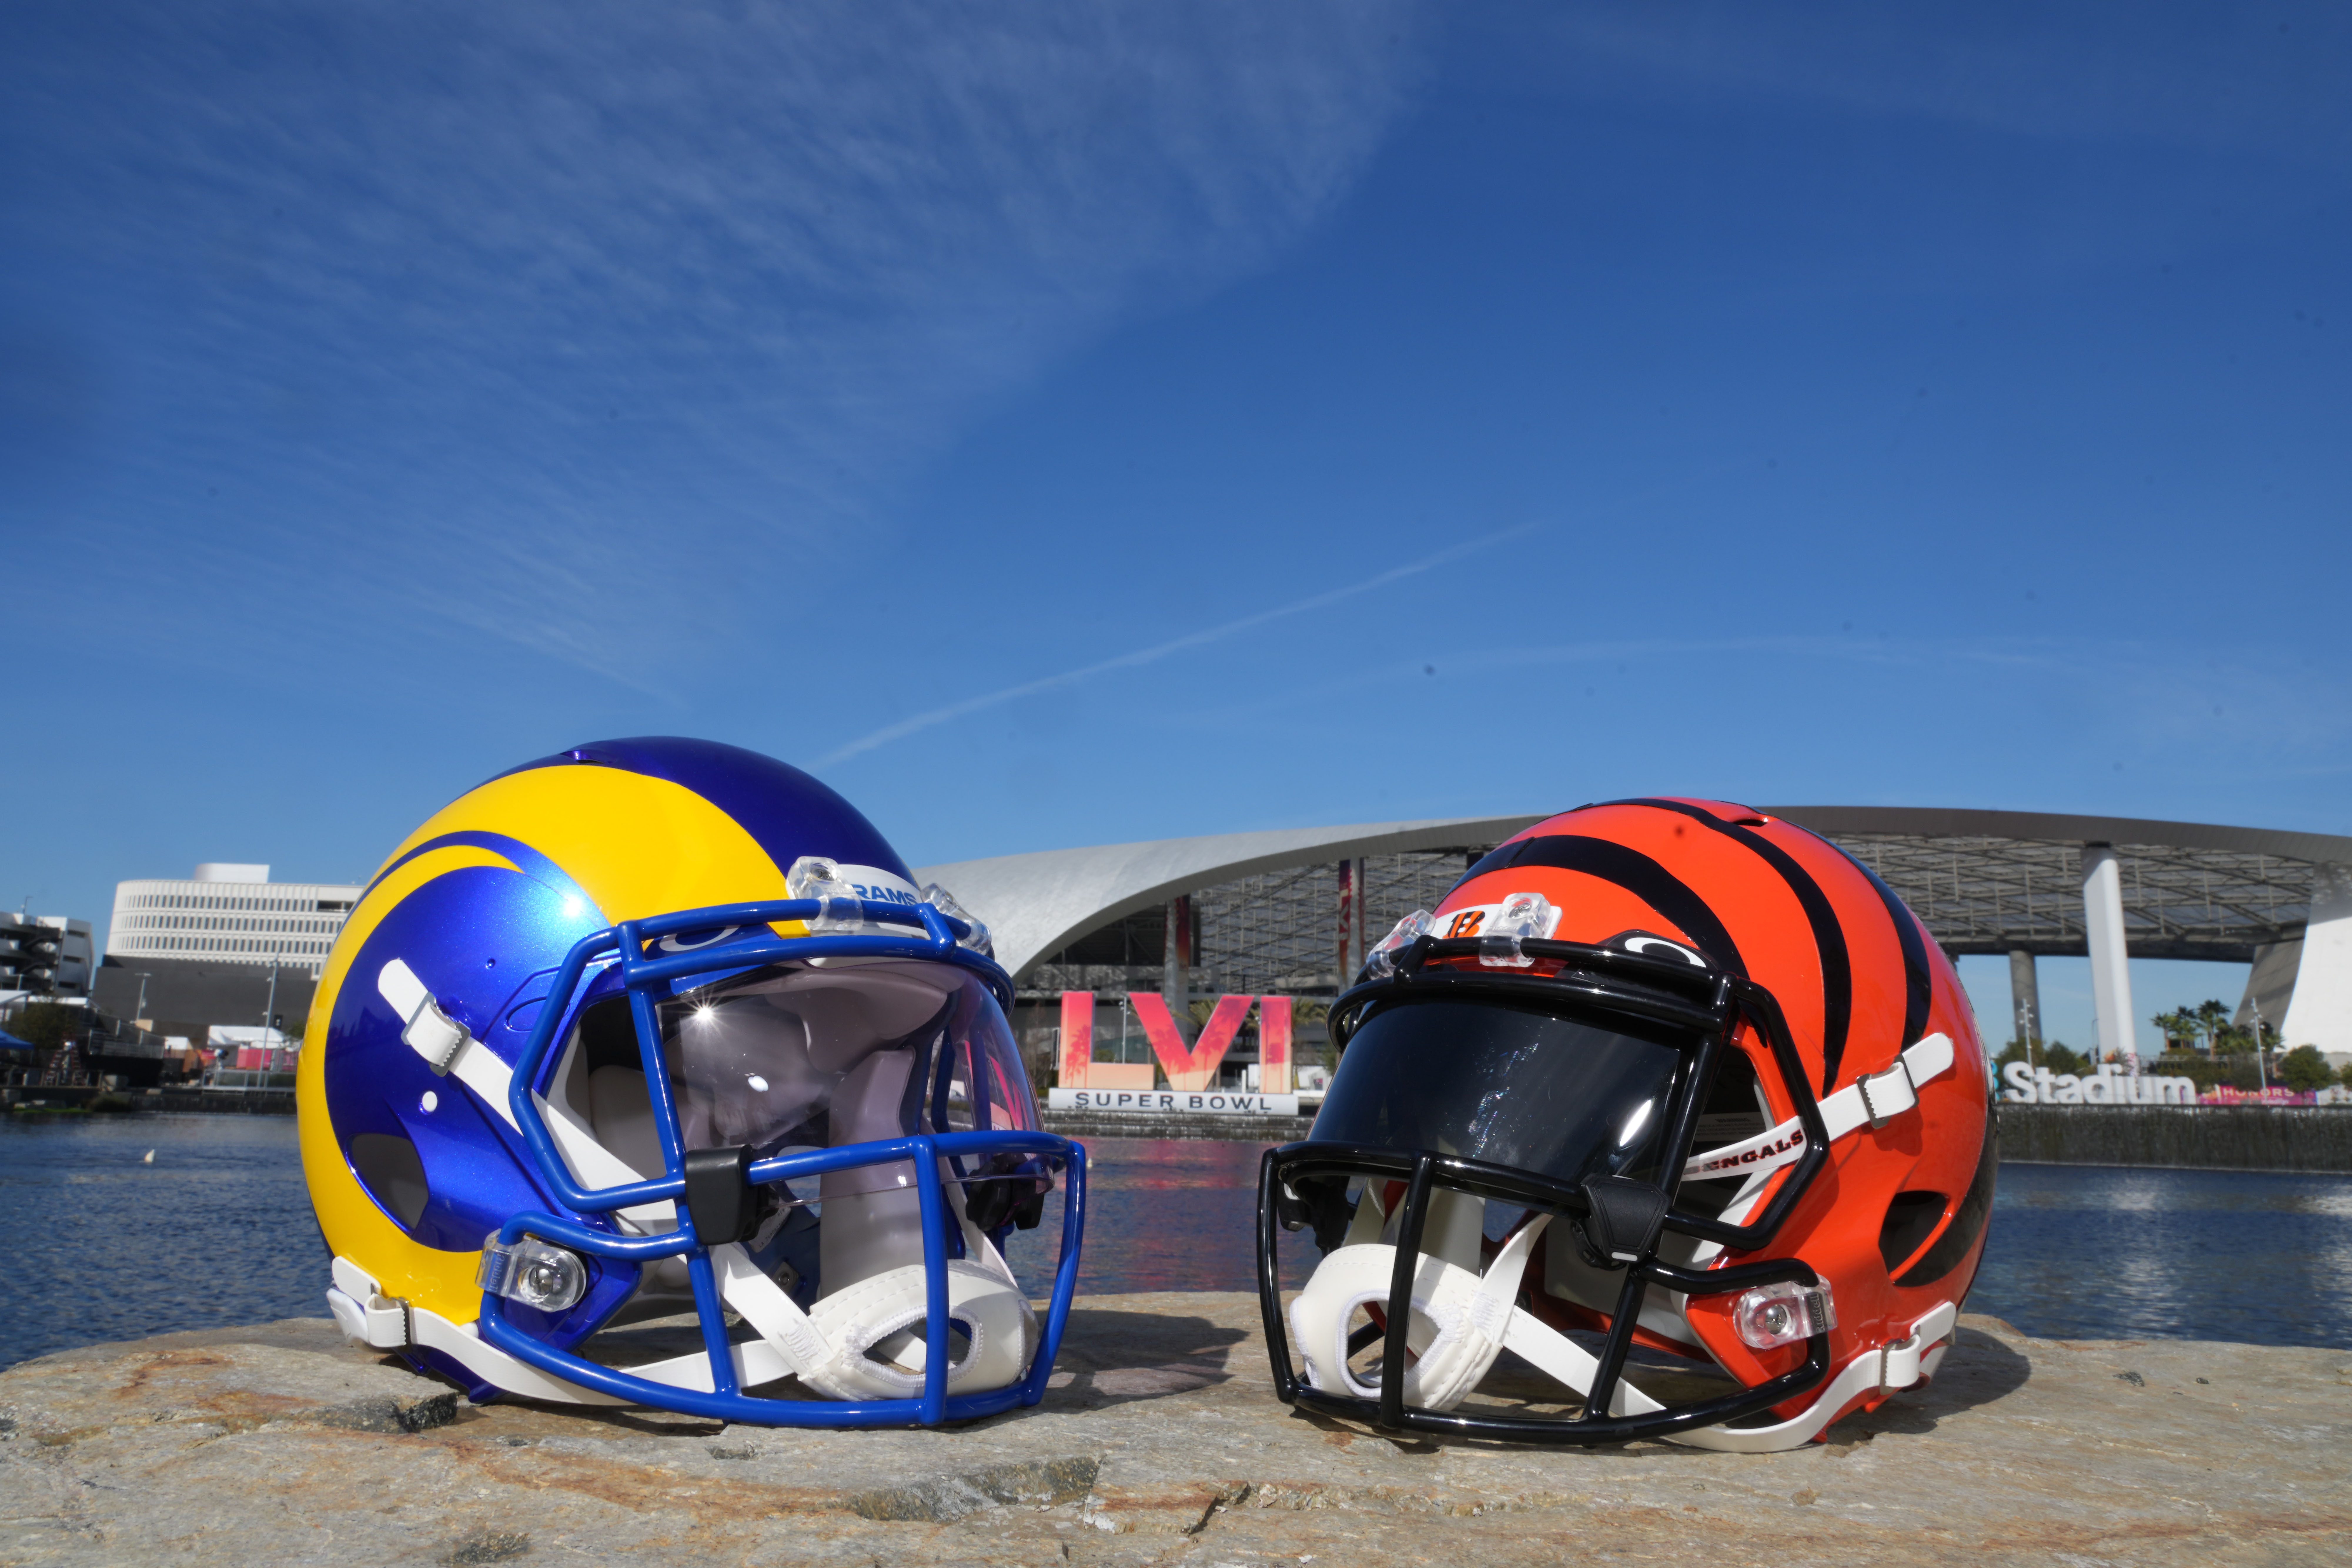 Super Bowl predictions 2022: Who's going to win on Sunday